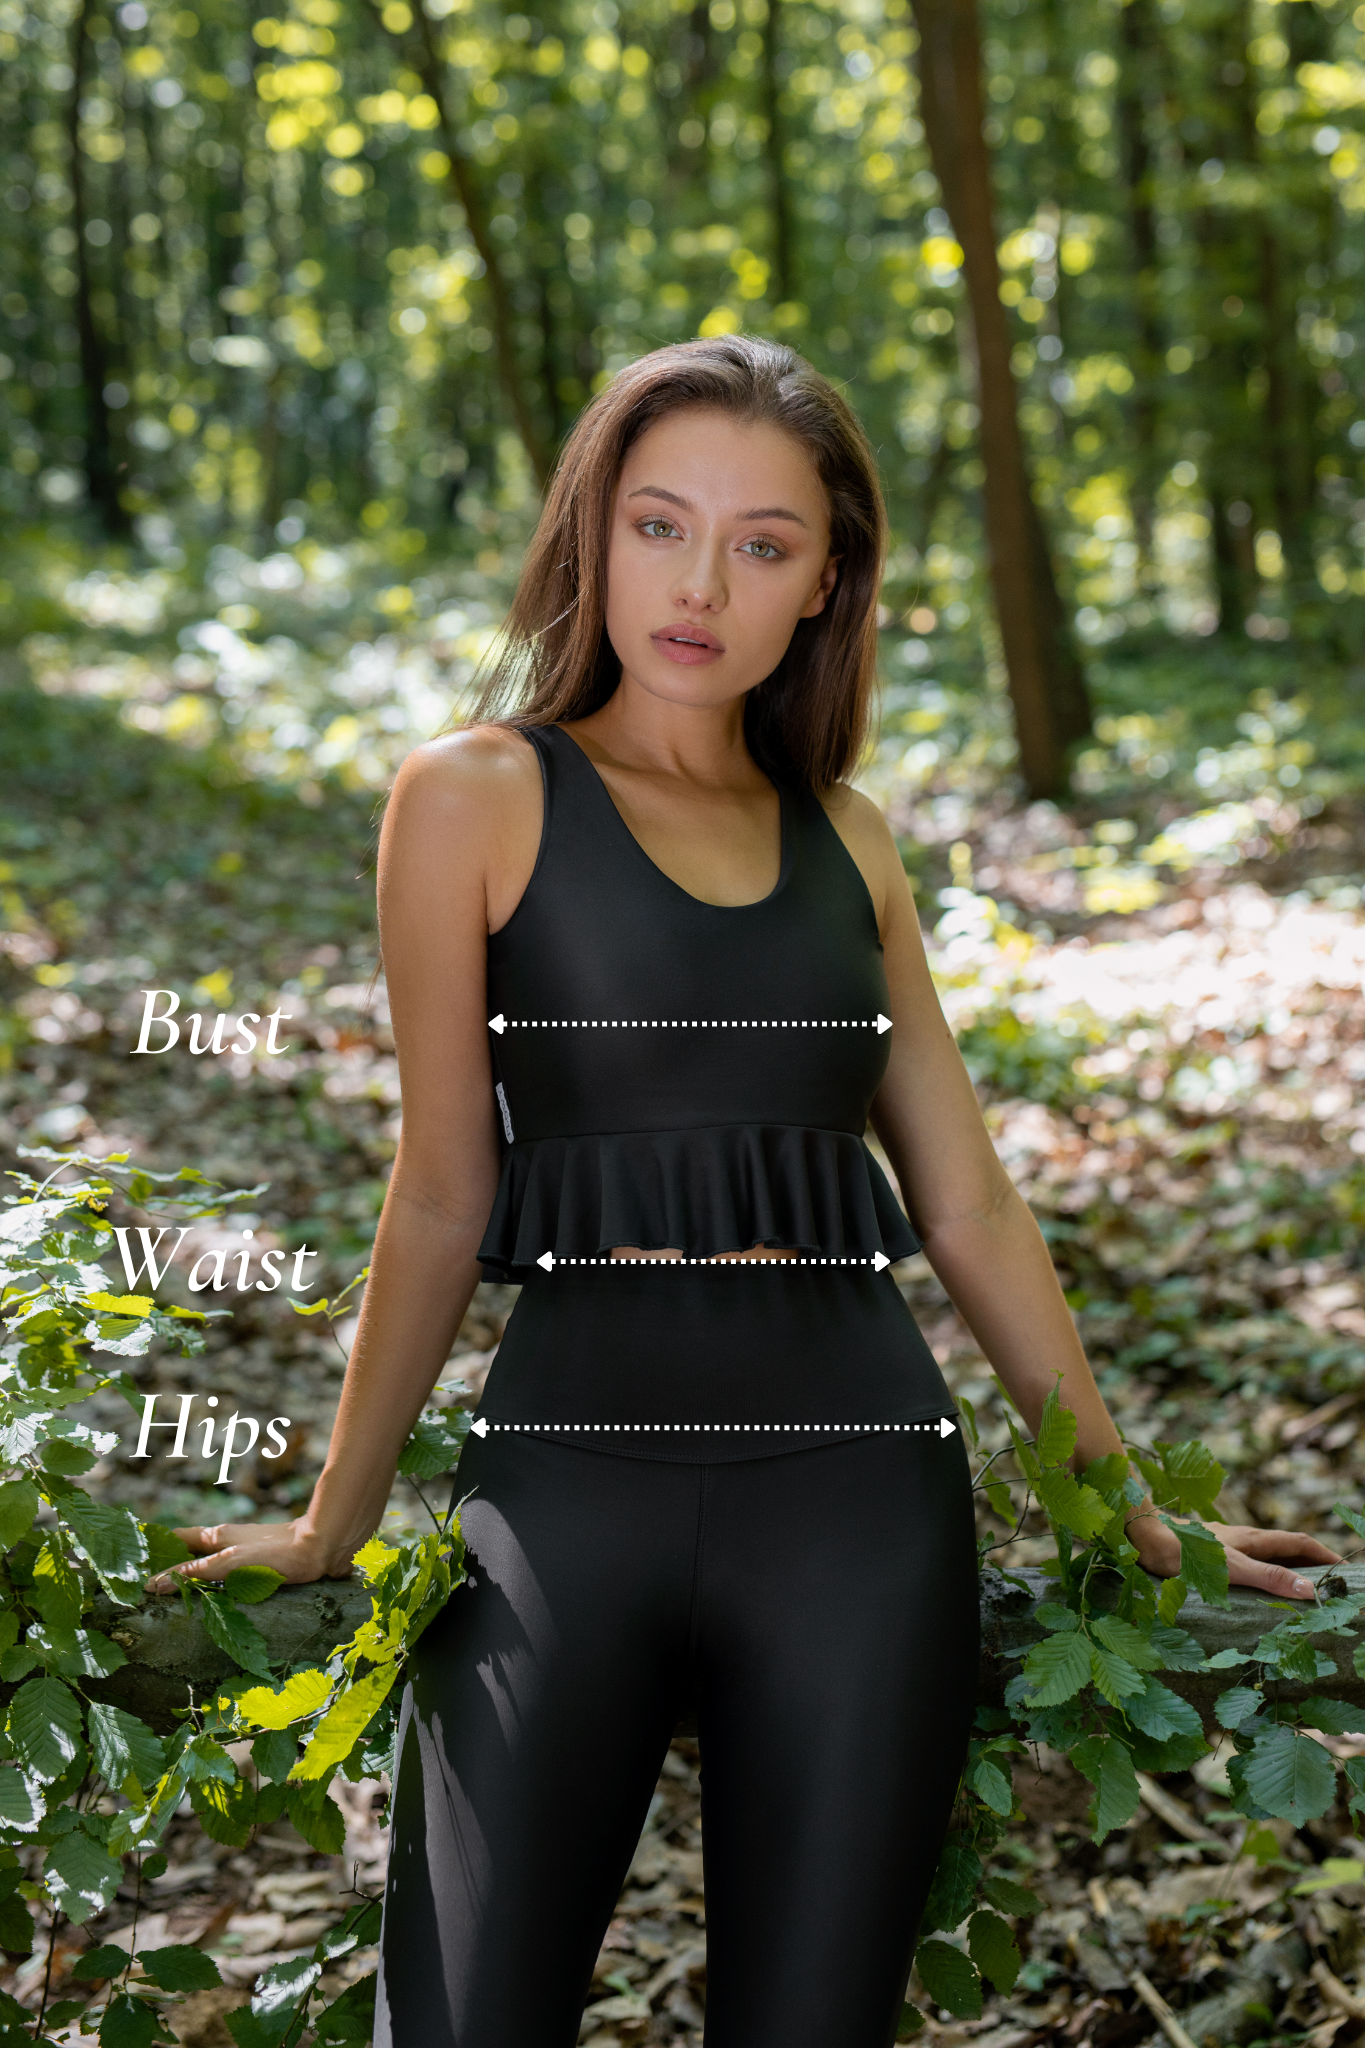 How to measure bust, waist and hips to find out your clothing size